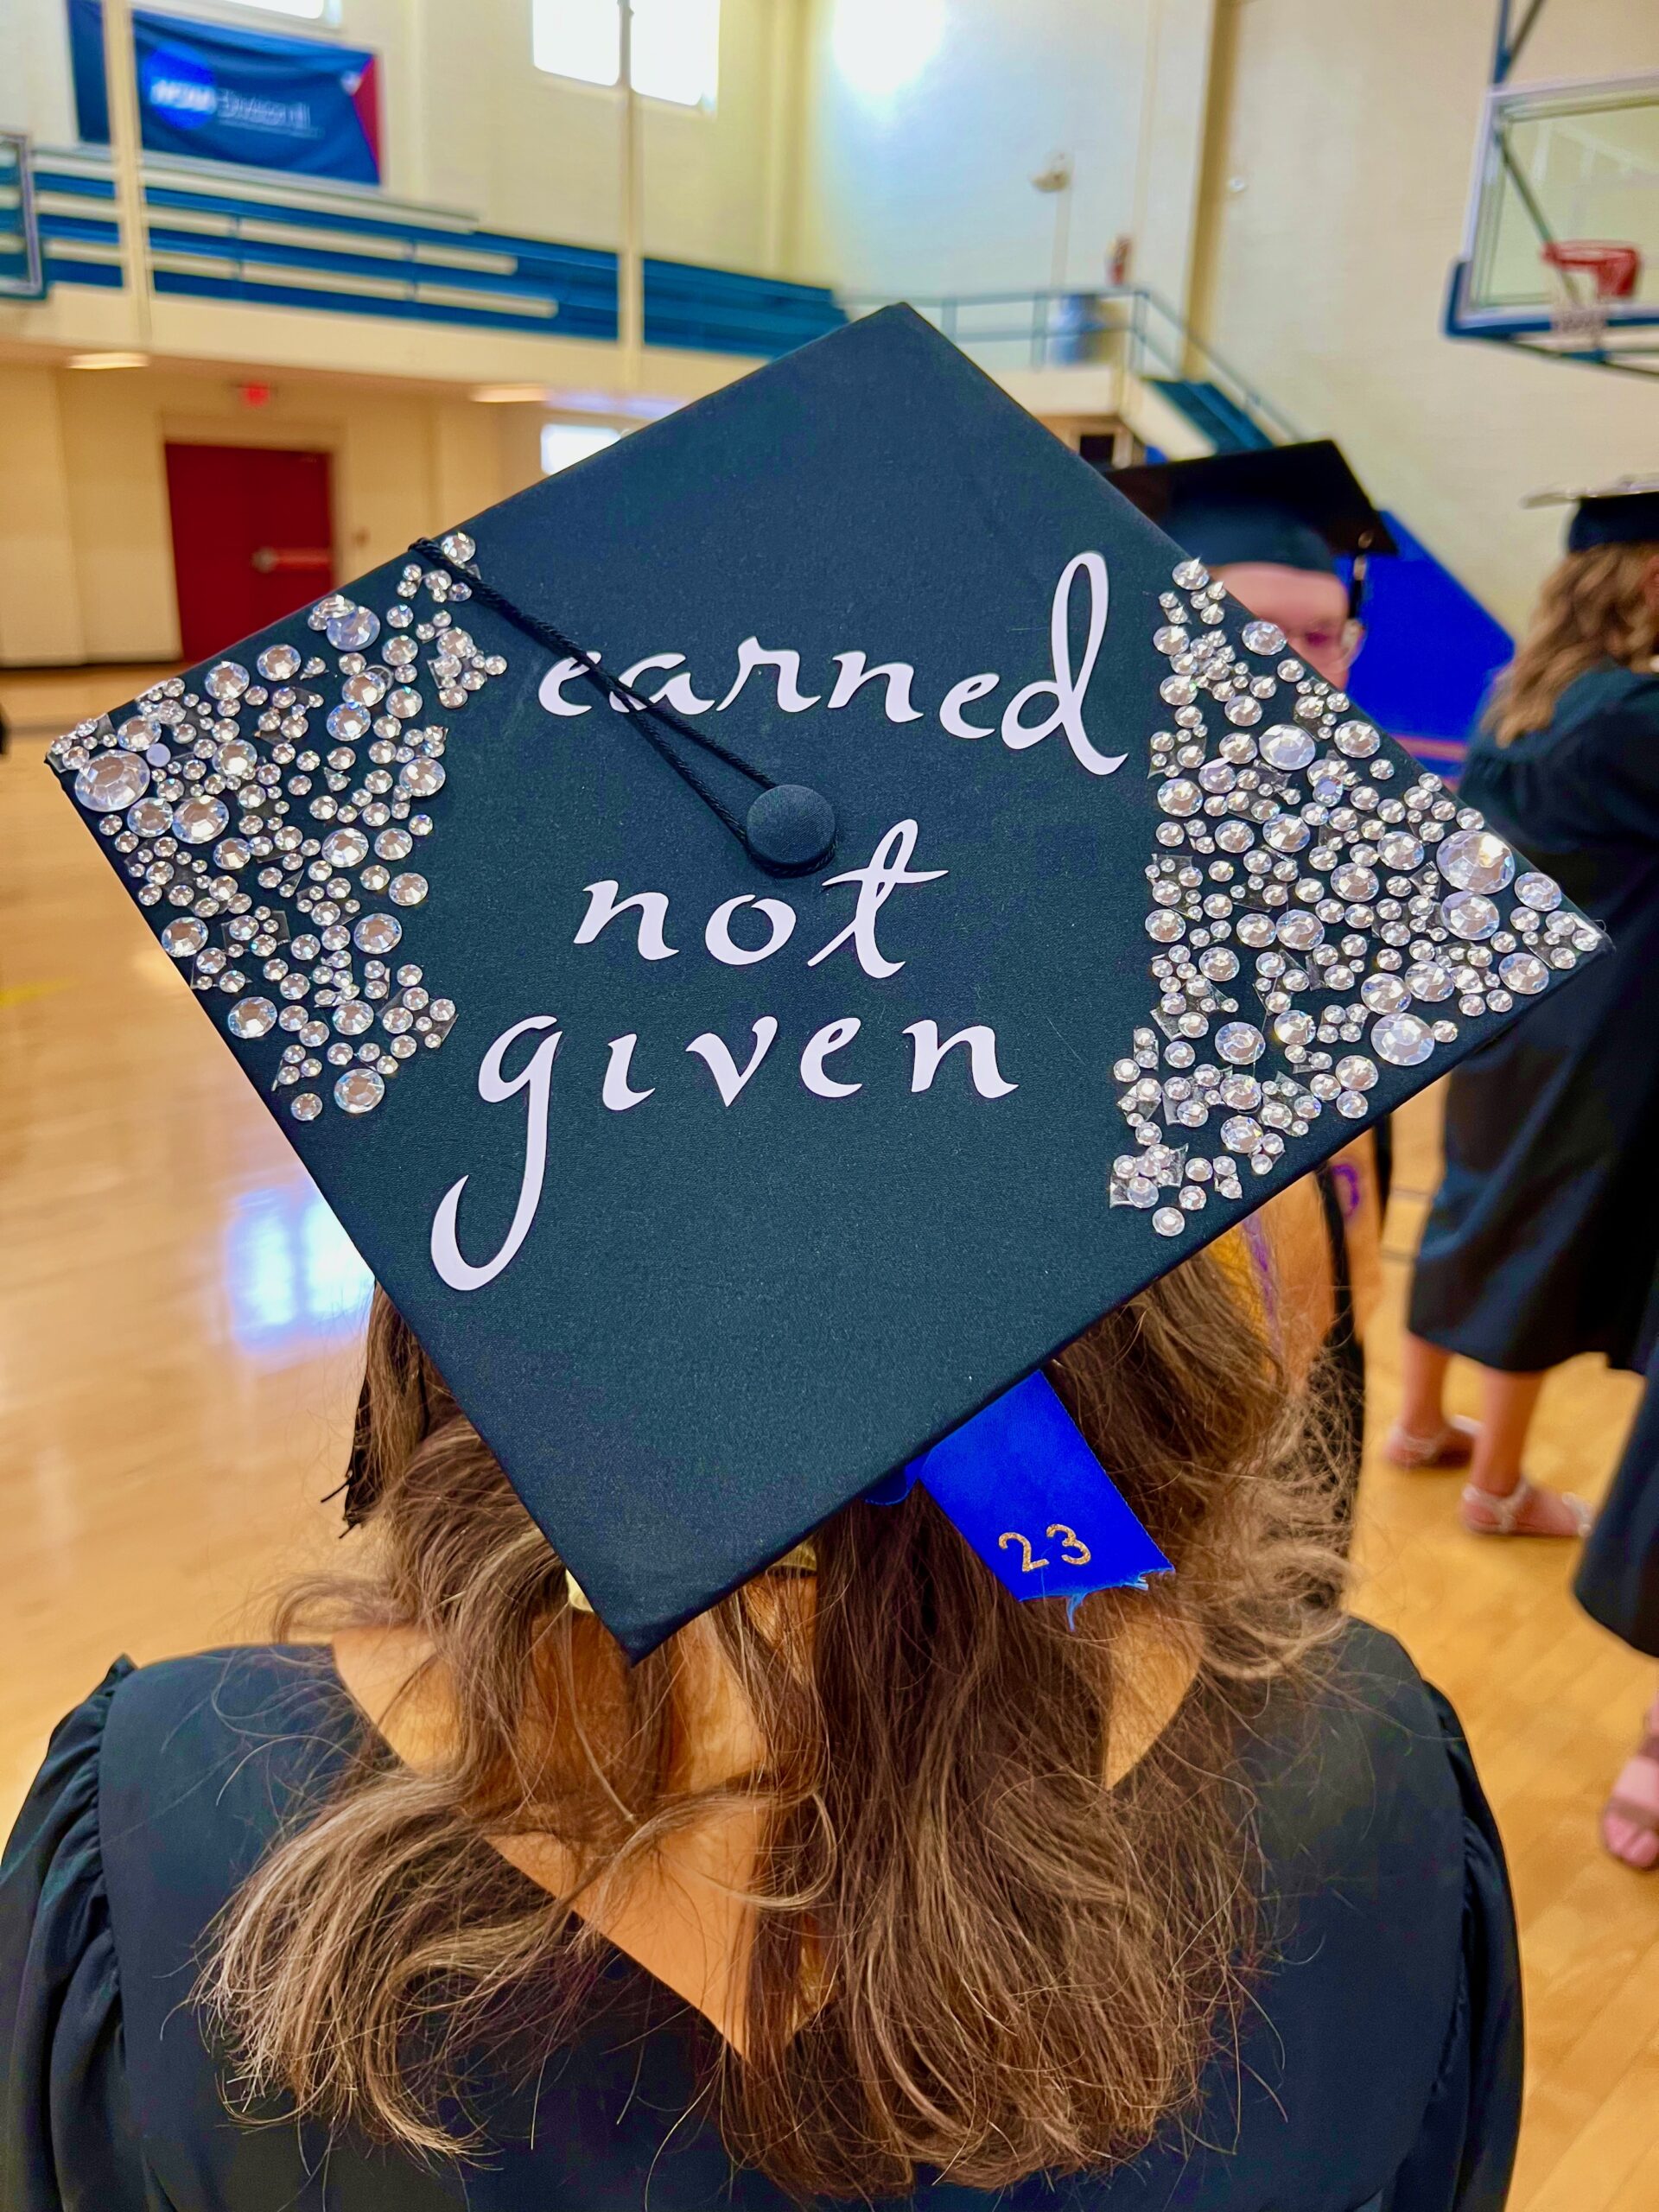 Decorated mortarboard reading "Earned not given"